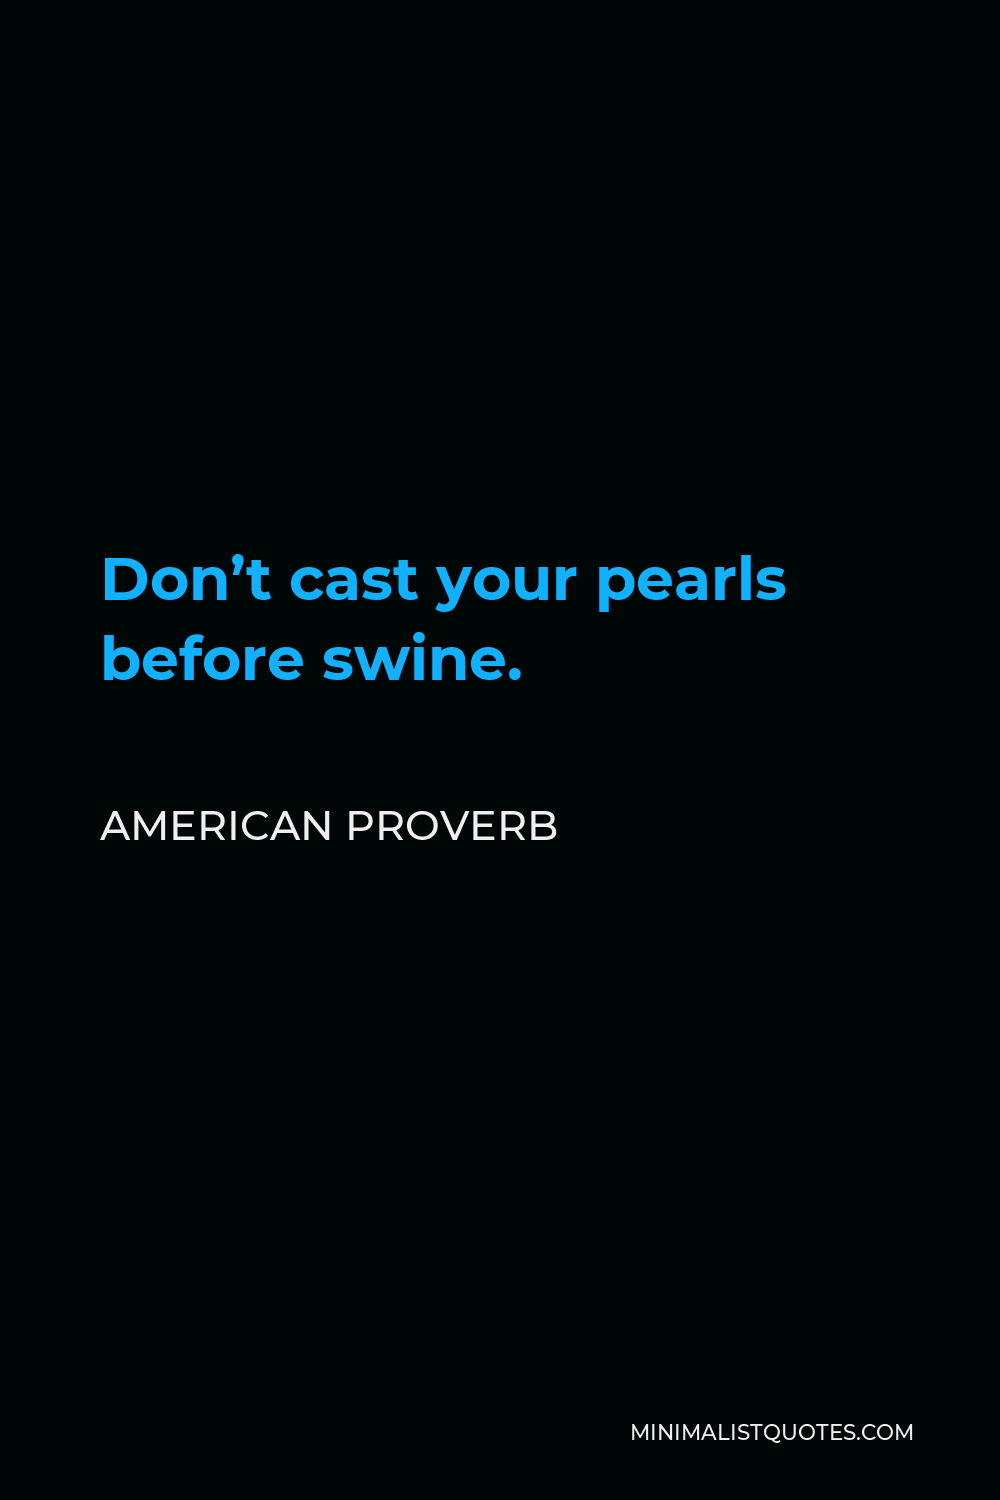 American Proverb Quote - Don’t cast your pearls before swine.